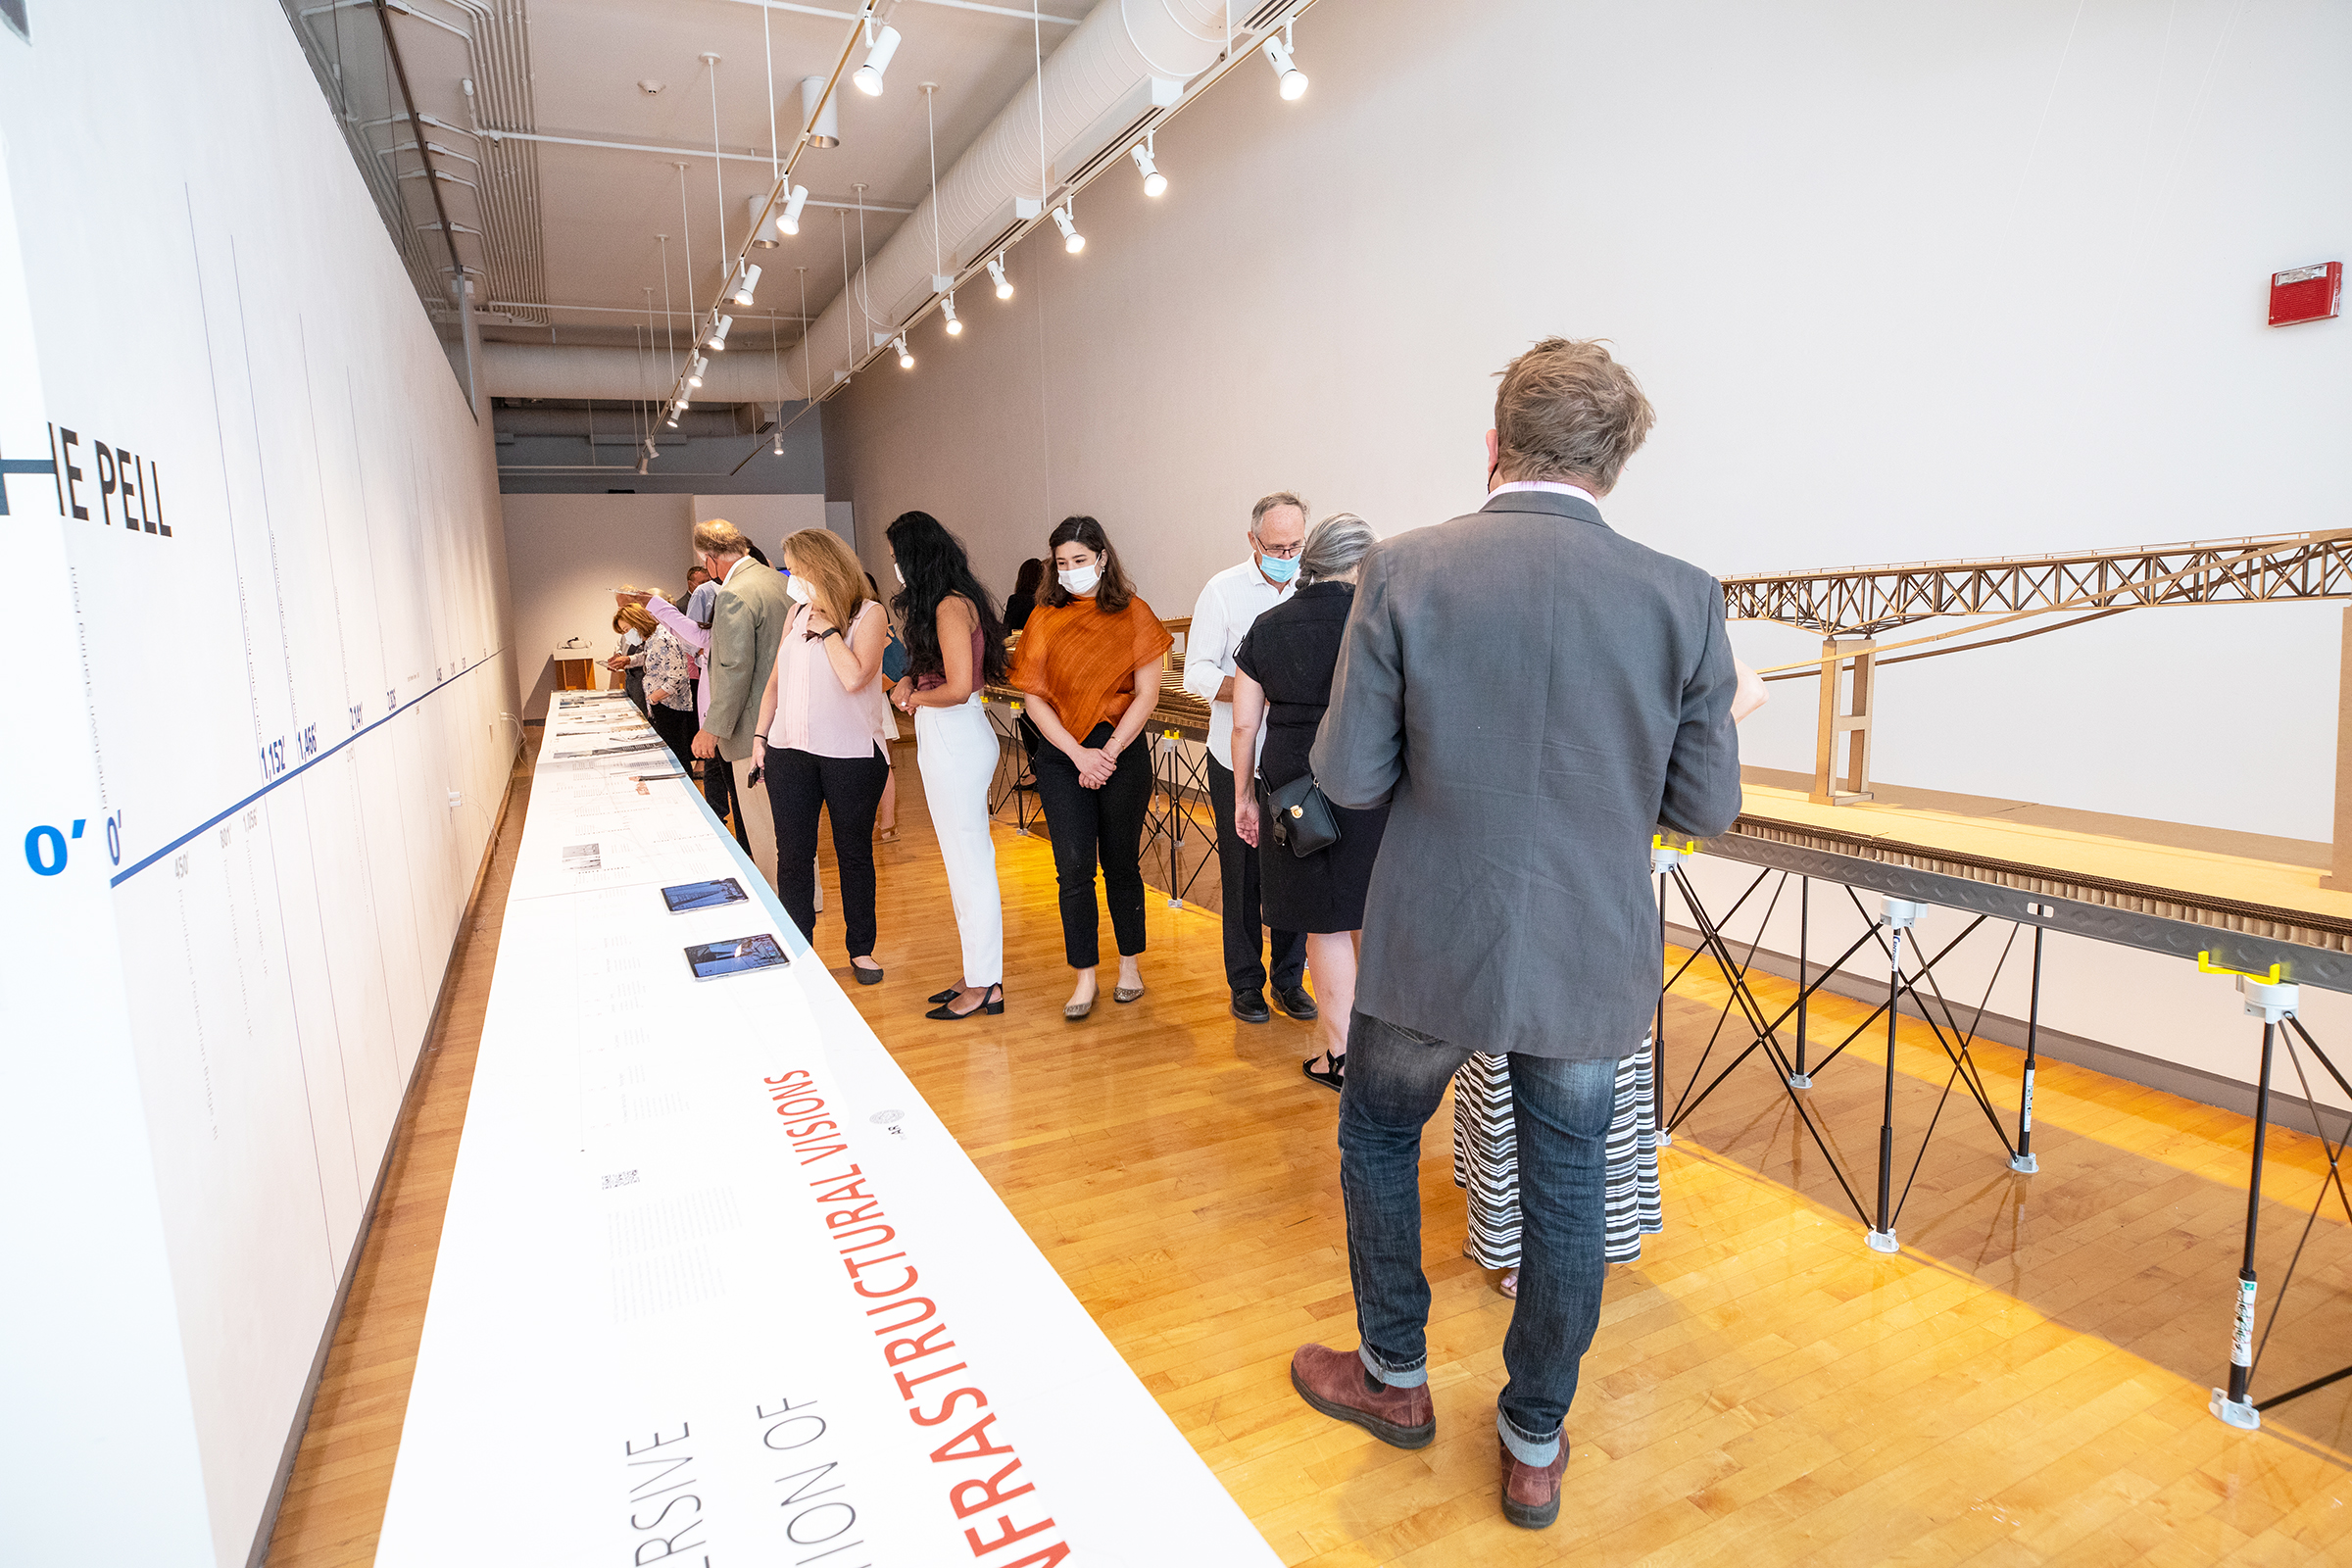 visitors examine the timeline at Crossing the Pell exhibition